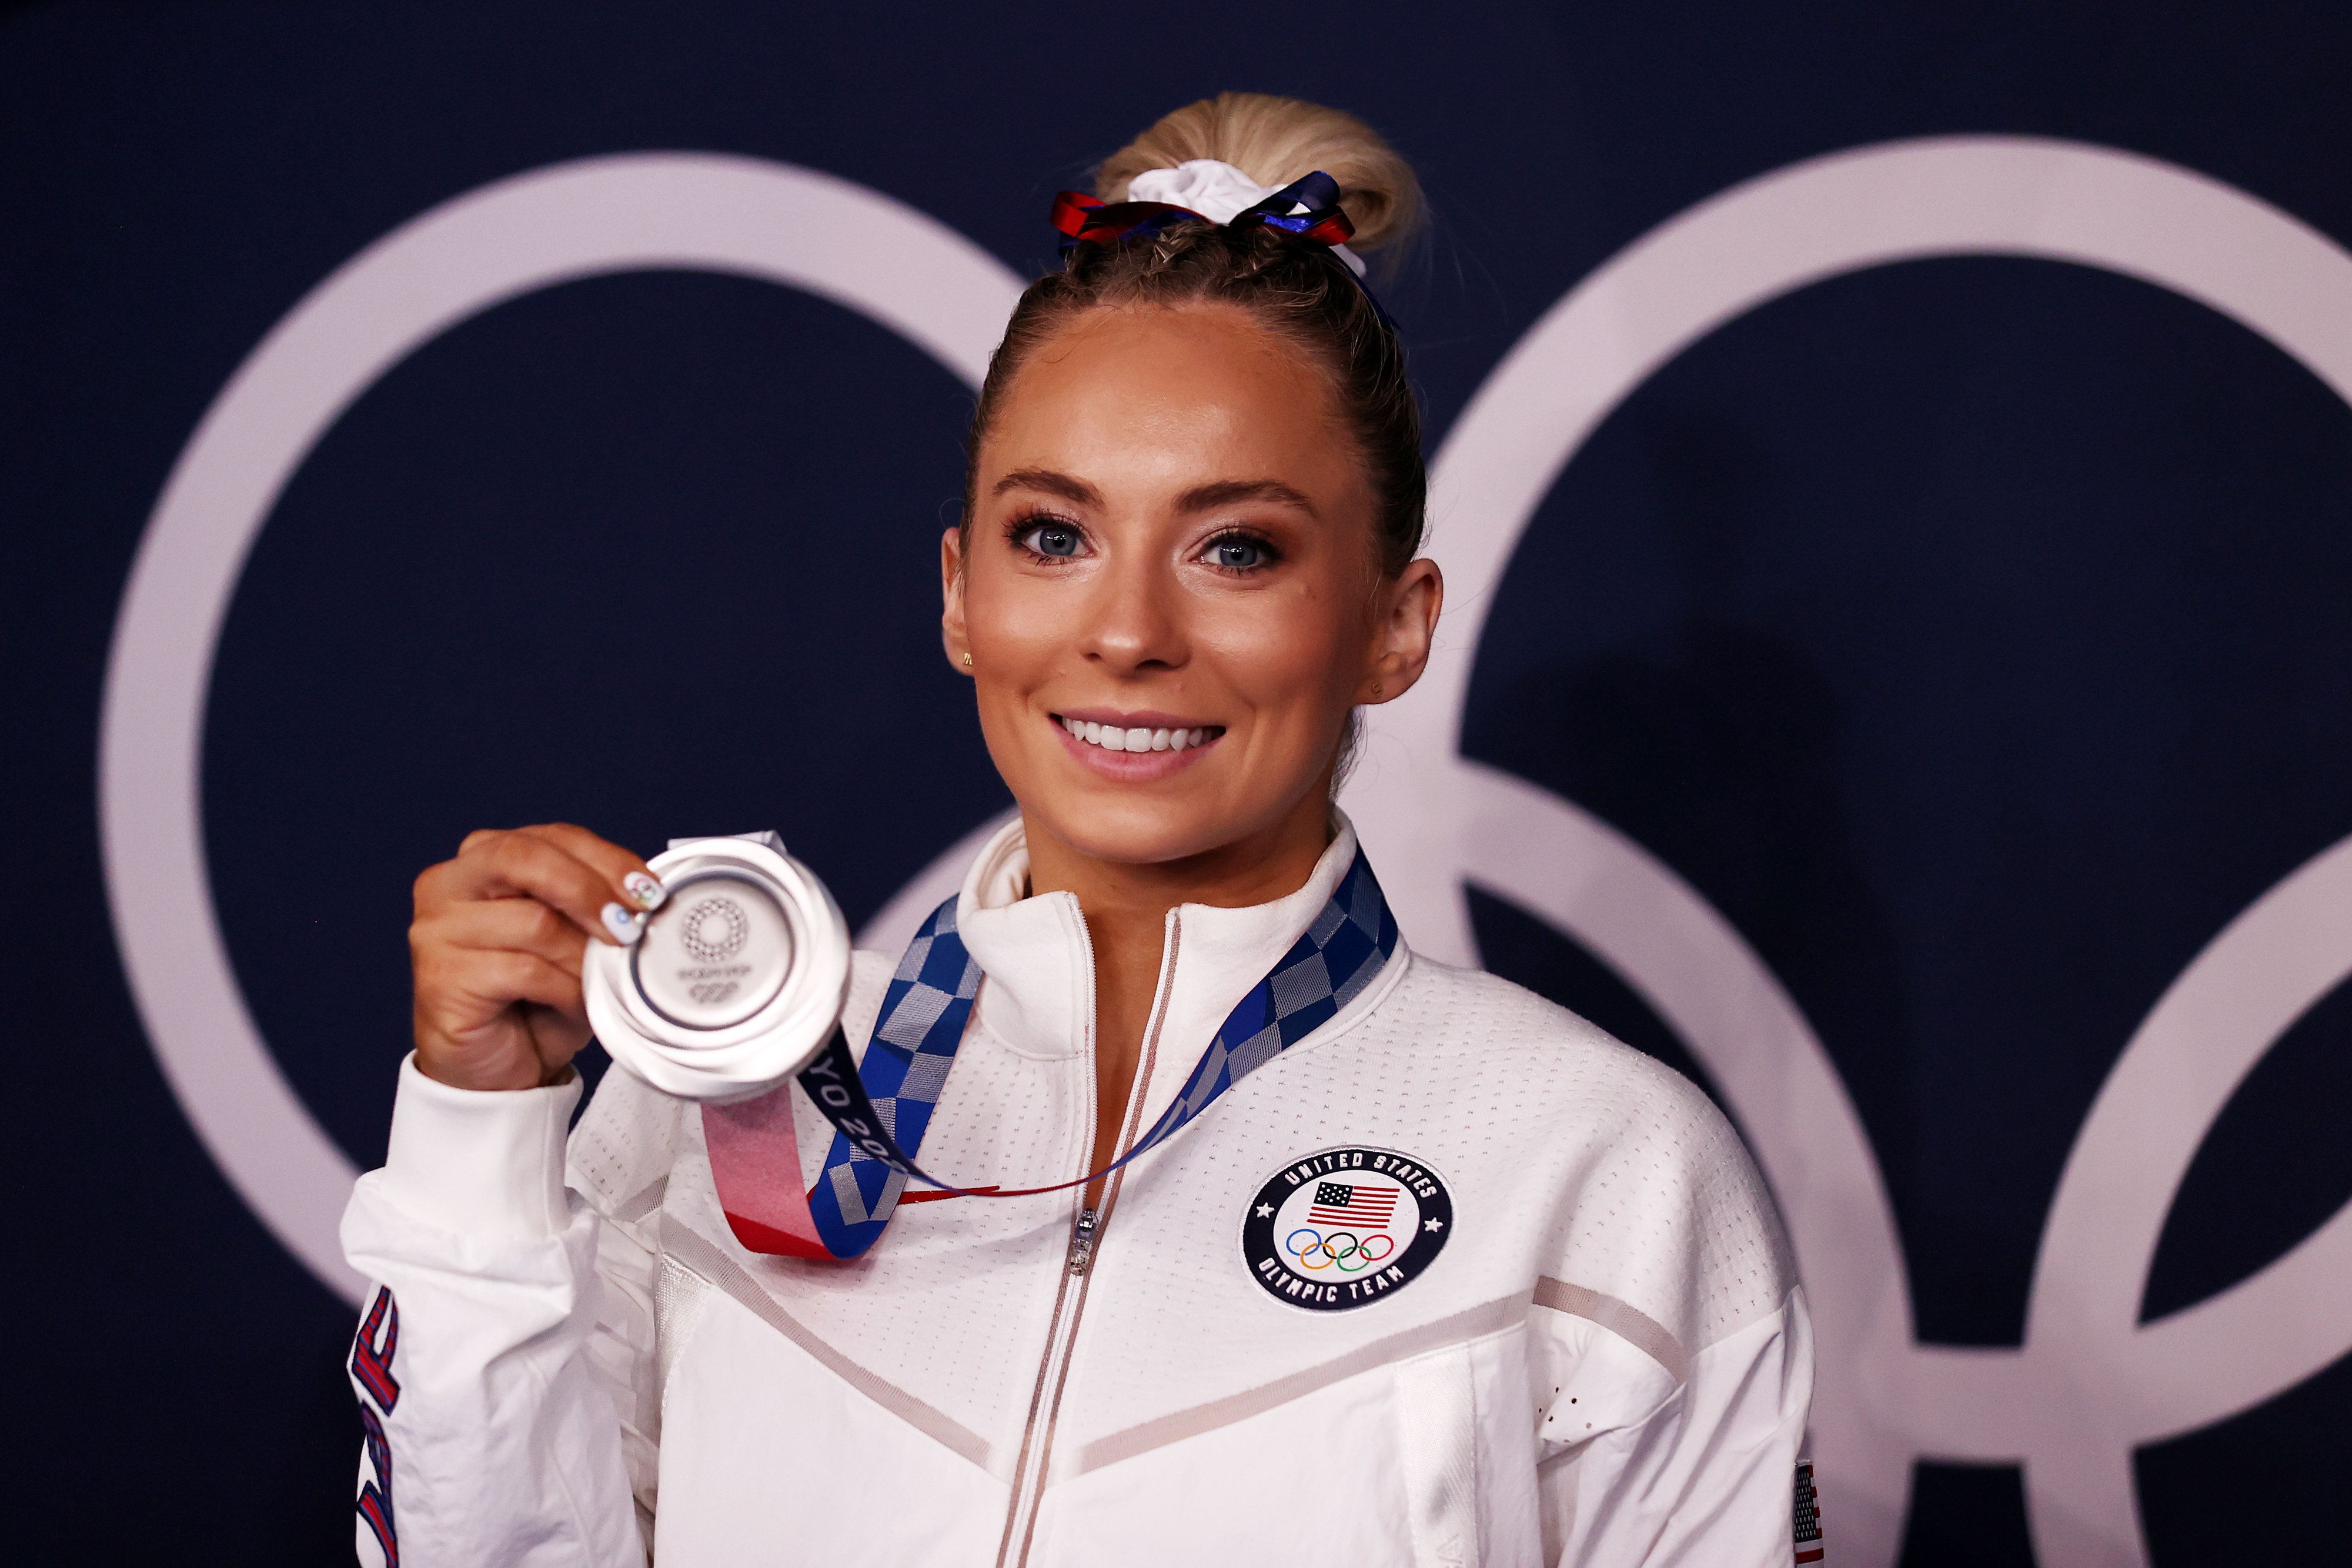 MyKayla Skinner holds her silver Olympic medal while smiling in front of an Olympic rings backdrop. She is wearing a Team USA tracksuit